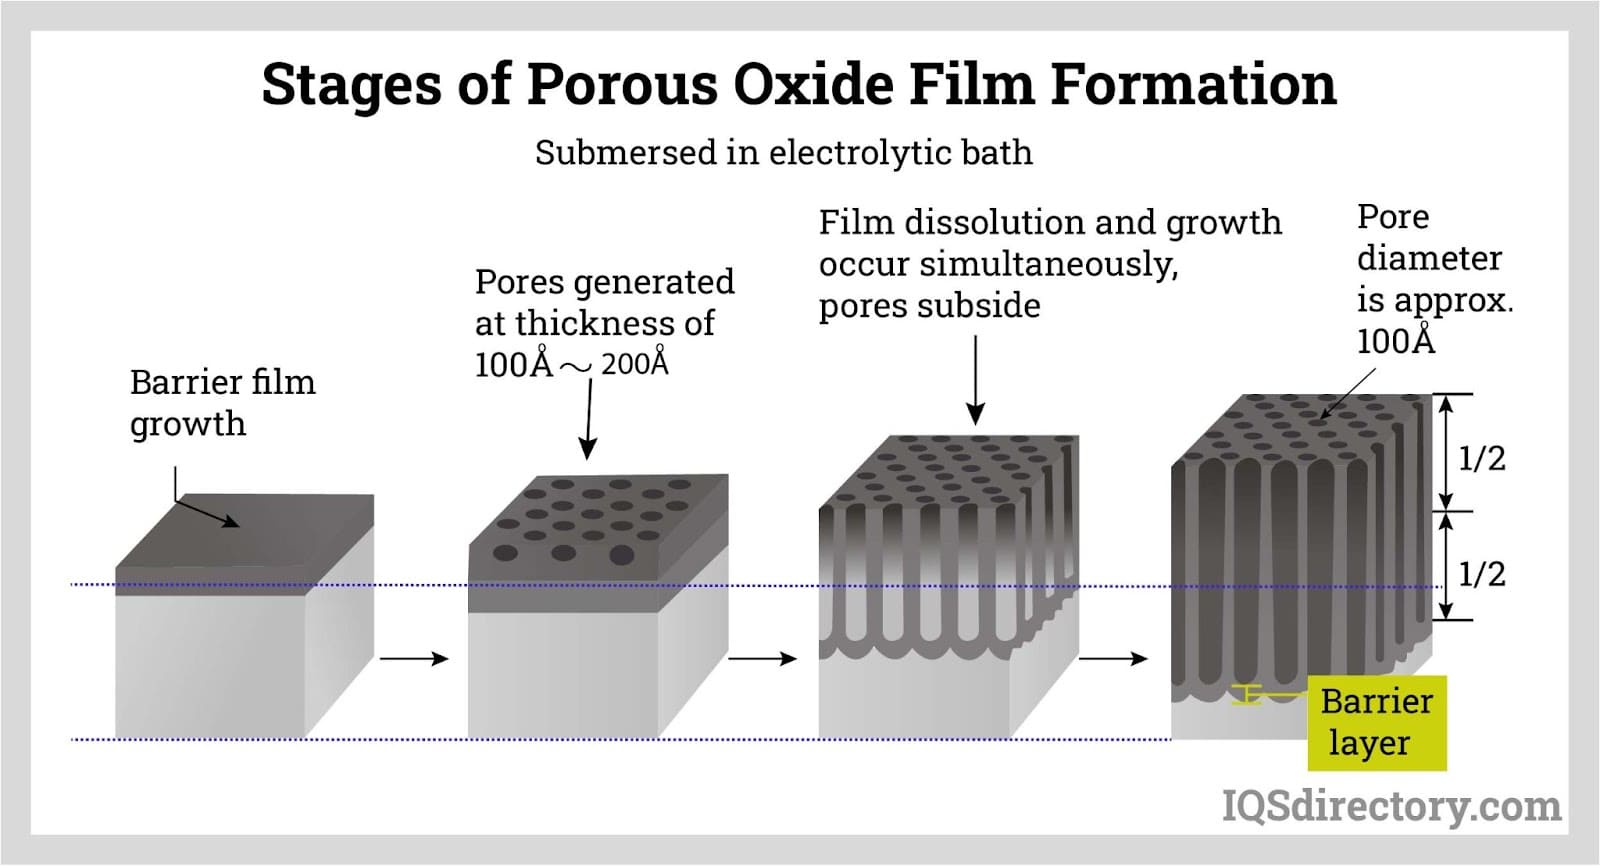 Stages of Porous Oxide Film Formation